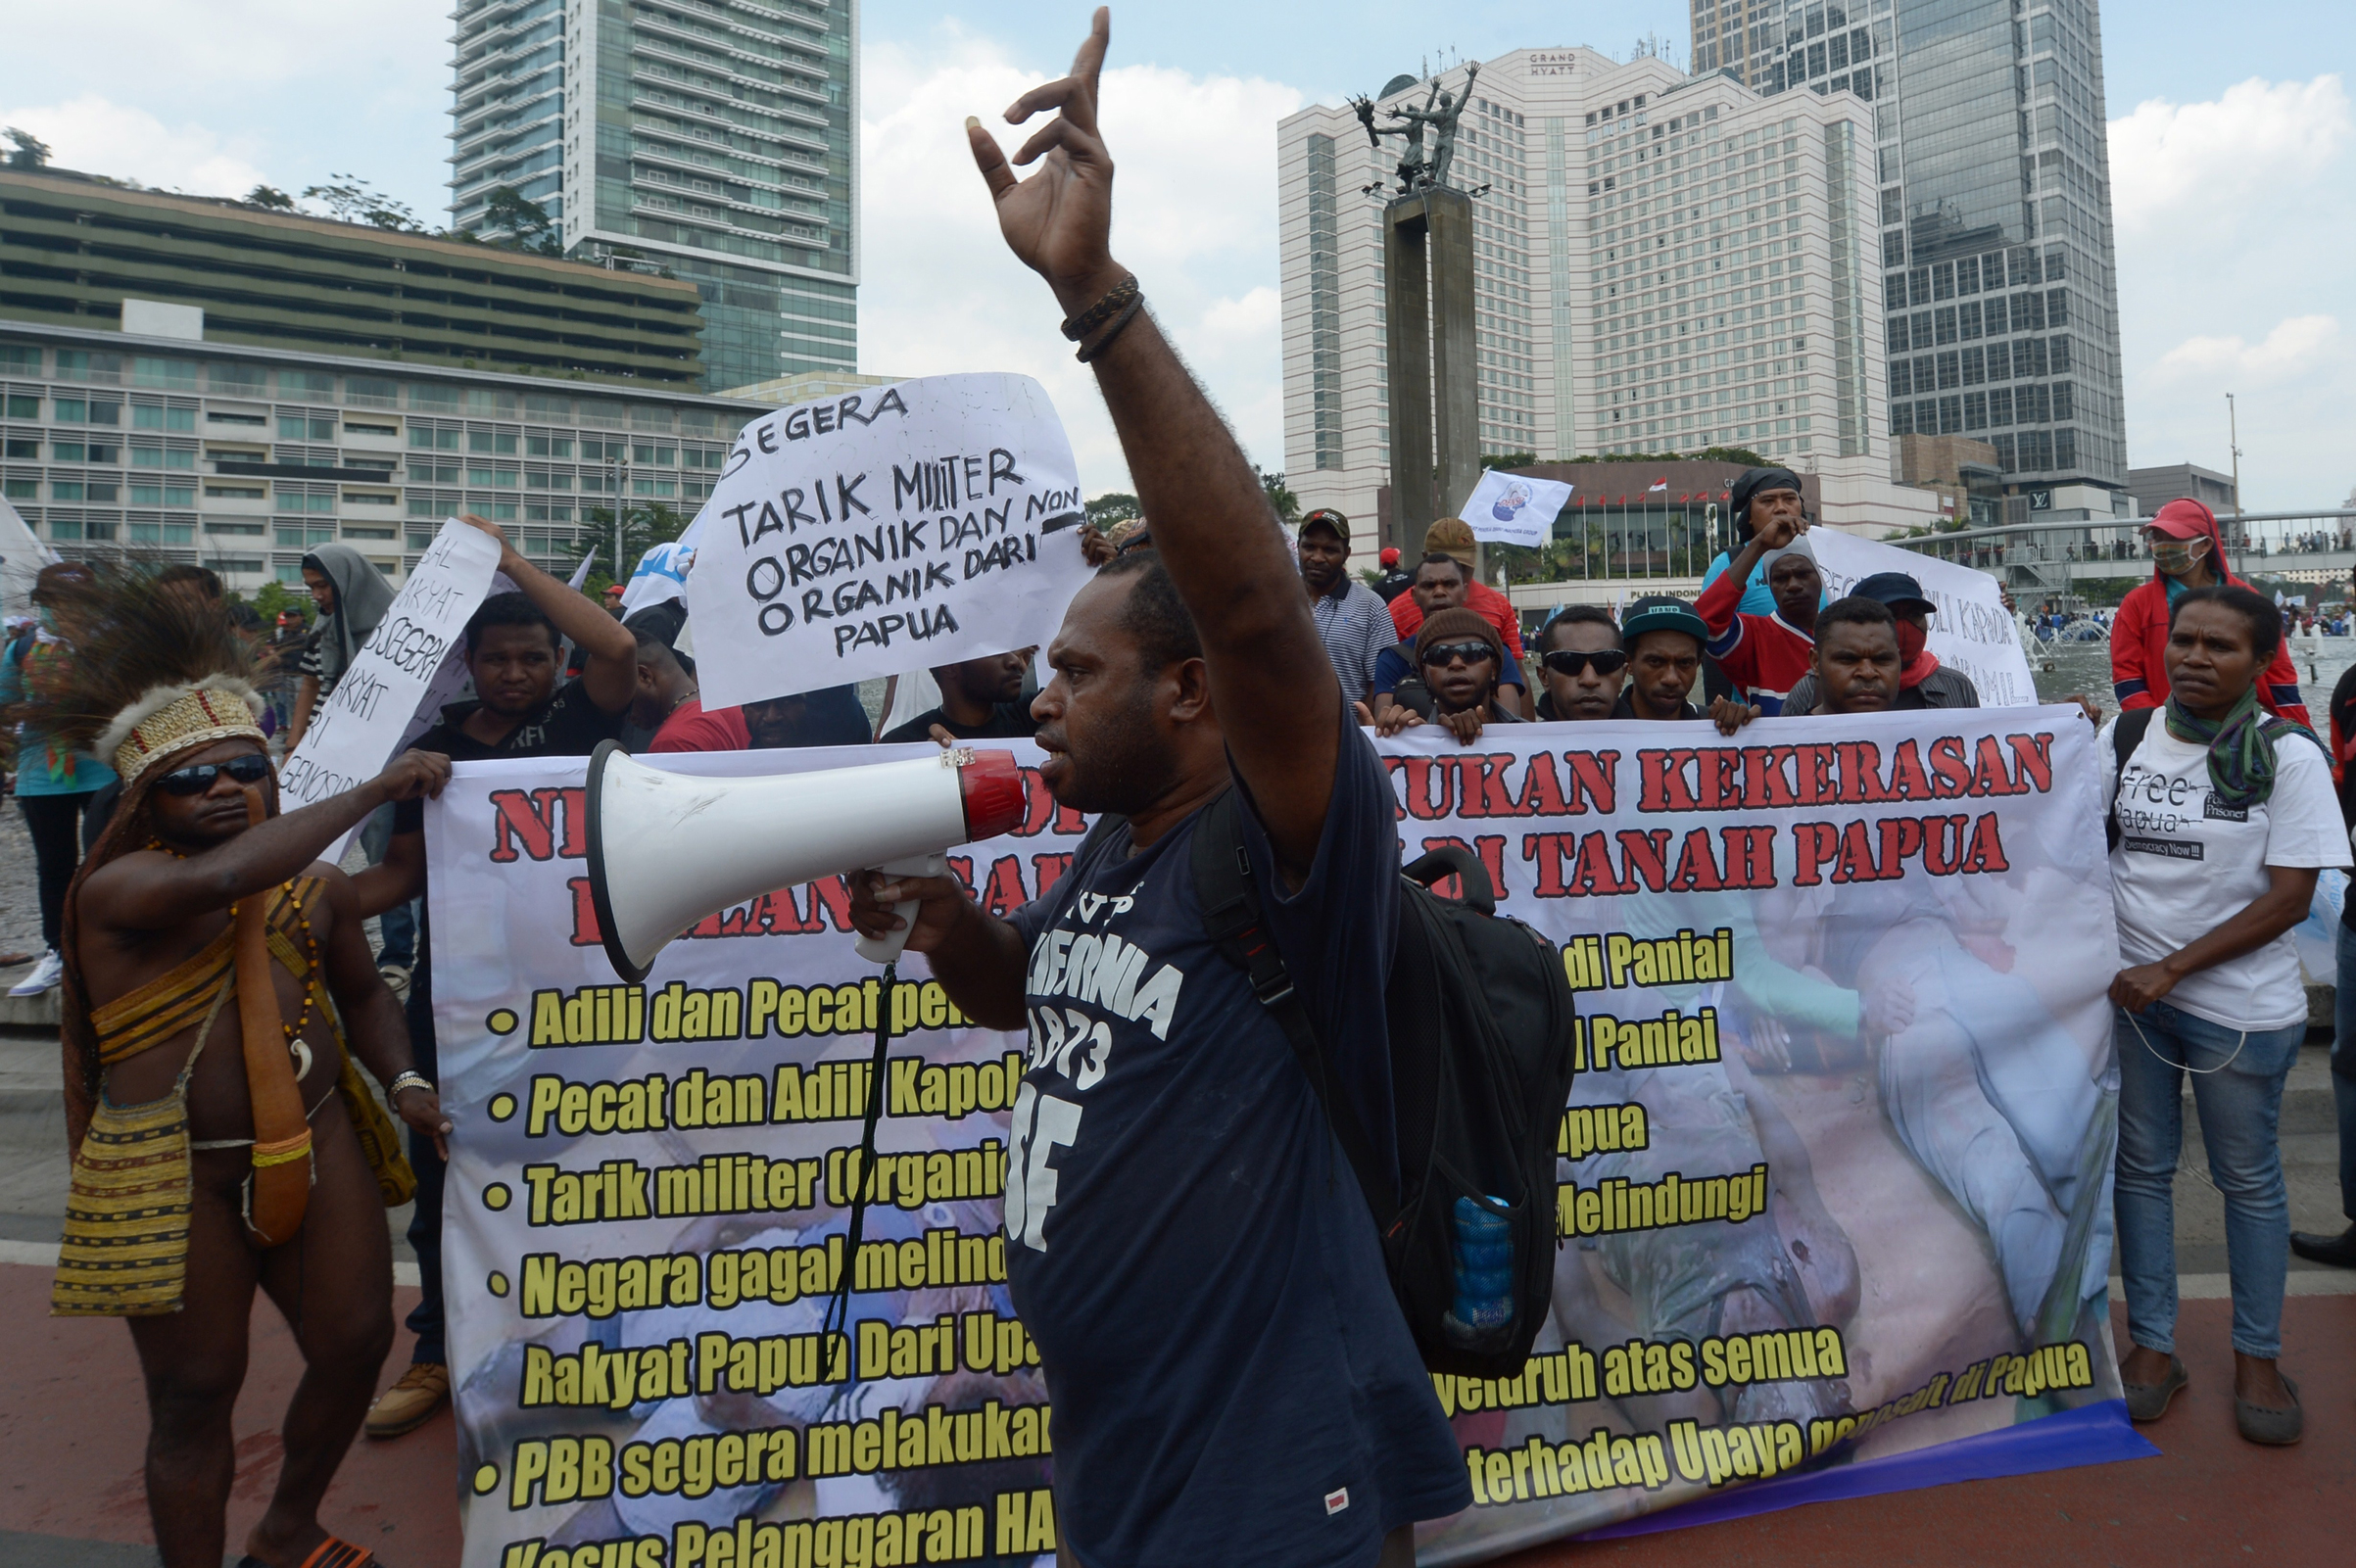 A Papuanese activist delivers speech during a protest against the fatal shooting of teenagers during clashes with security forces in Enarotali, at the Hotel Indonesia roundabout in Jakarta on Dec. 10, 2014. (Adek Berry—AFP/Getty Images)